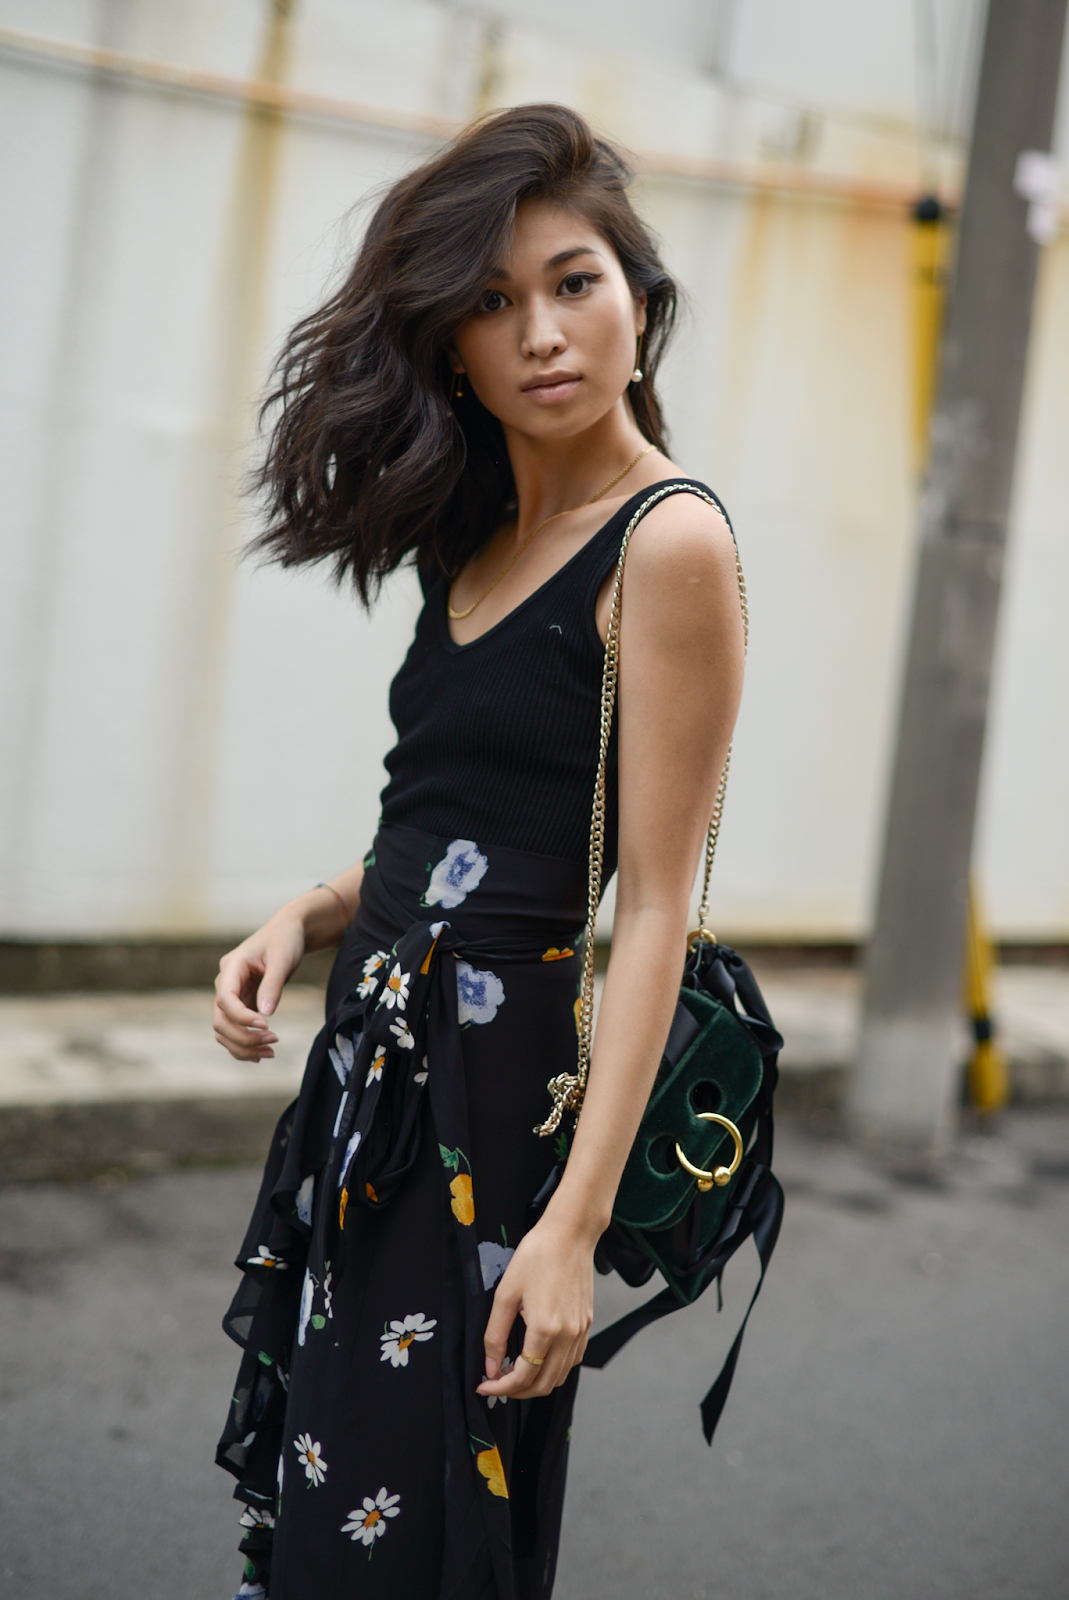 How To Wear Florals For Fall, Floral Midi Ruffle Skirt, Fall Skirts, 2018 Fall Trends, Ways To Wear Florals For Fall, Ganni Midi Ruffle Skirt, Personal Style Blogger, Fall Florals / FOREVERVANNY.com